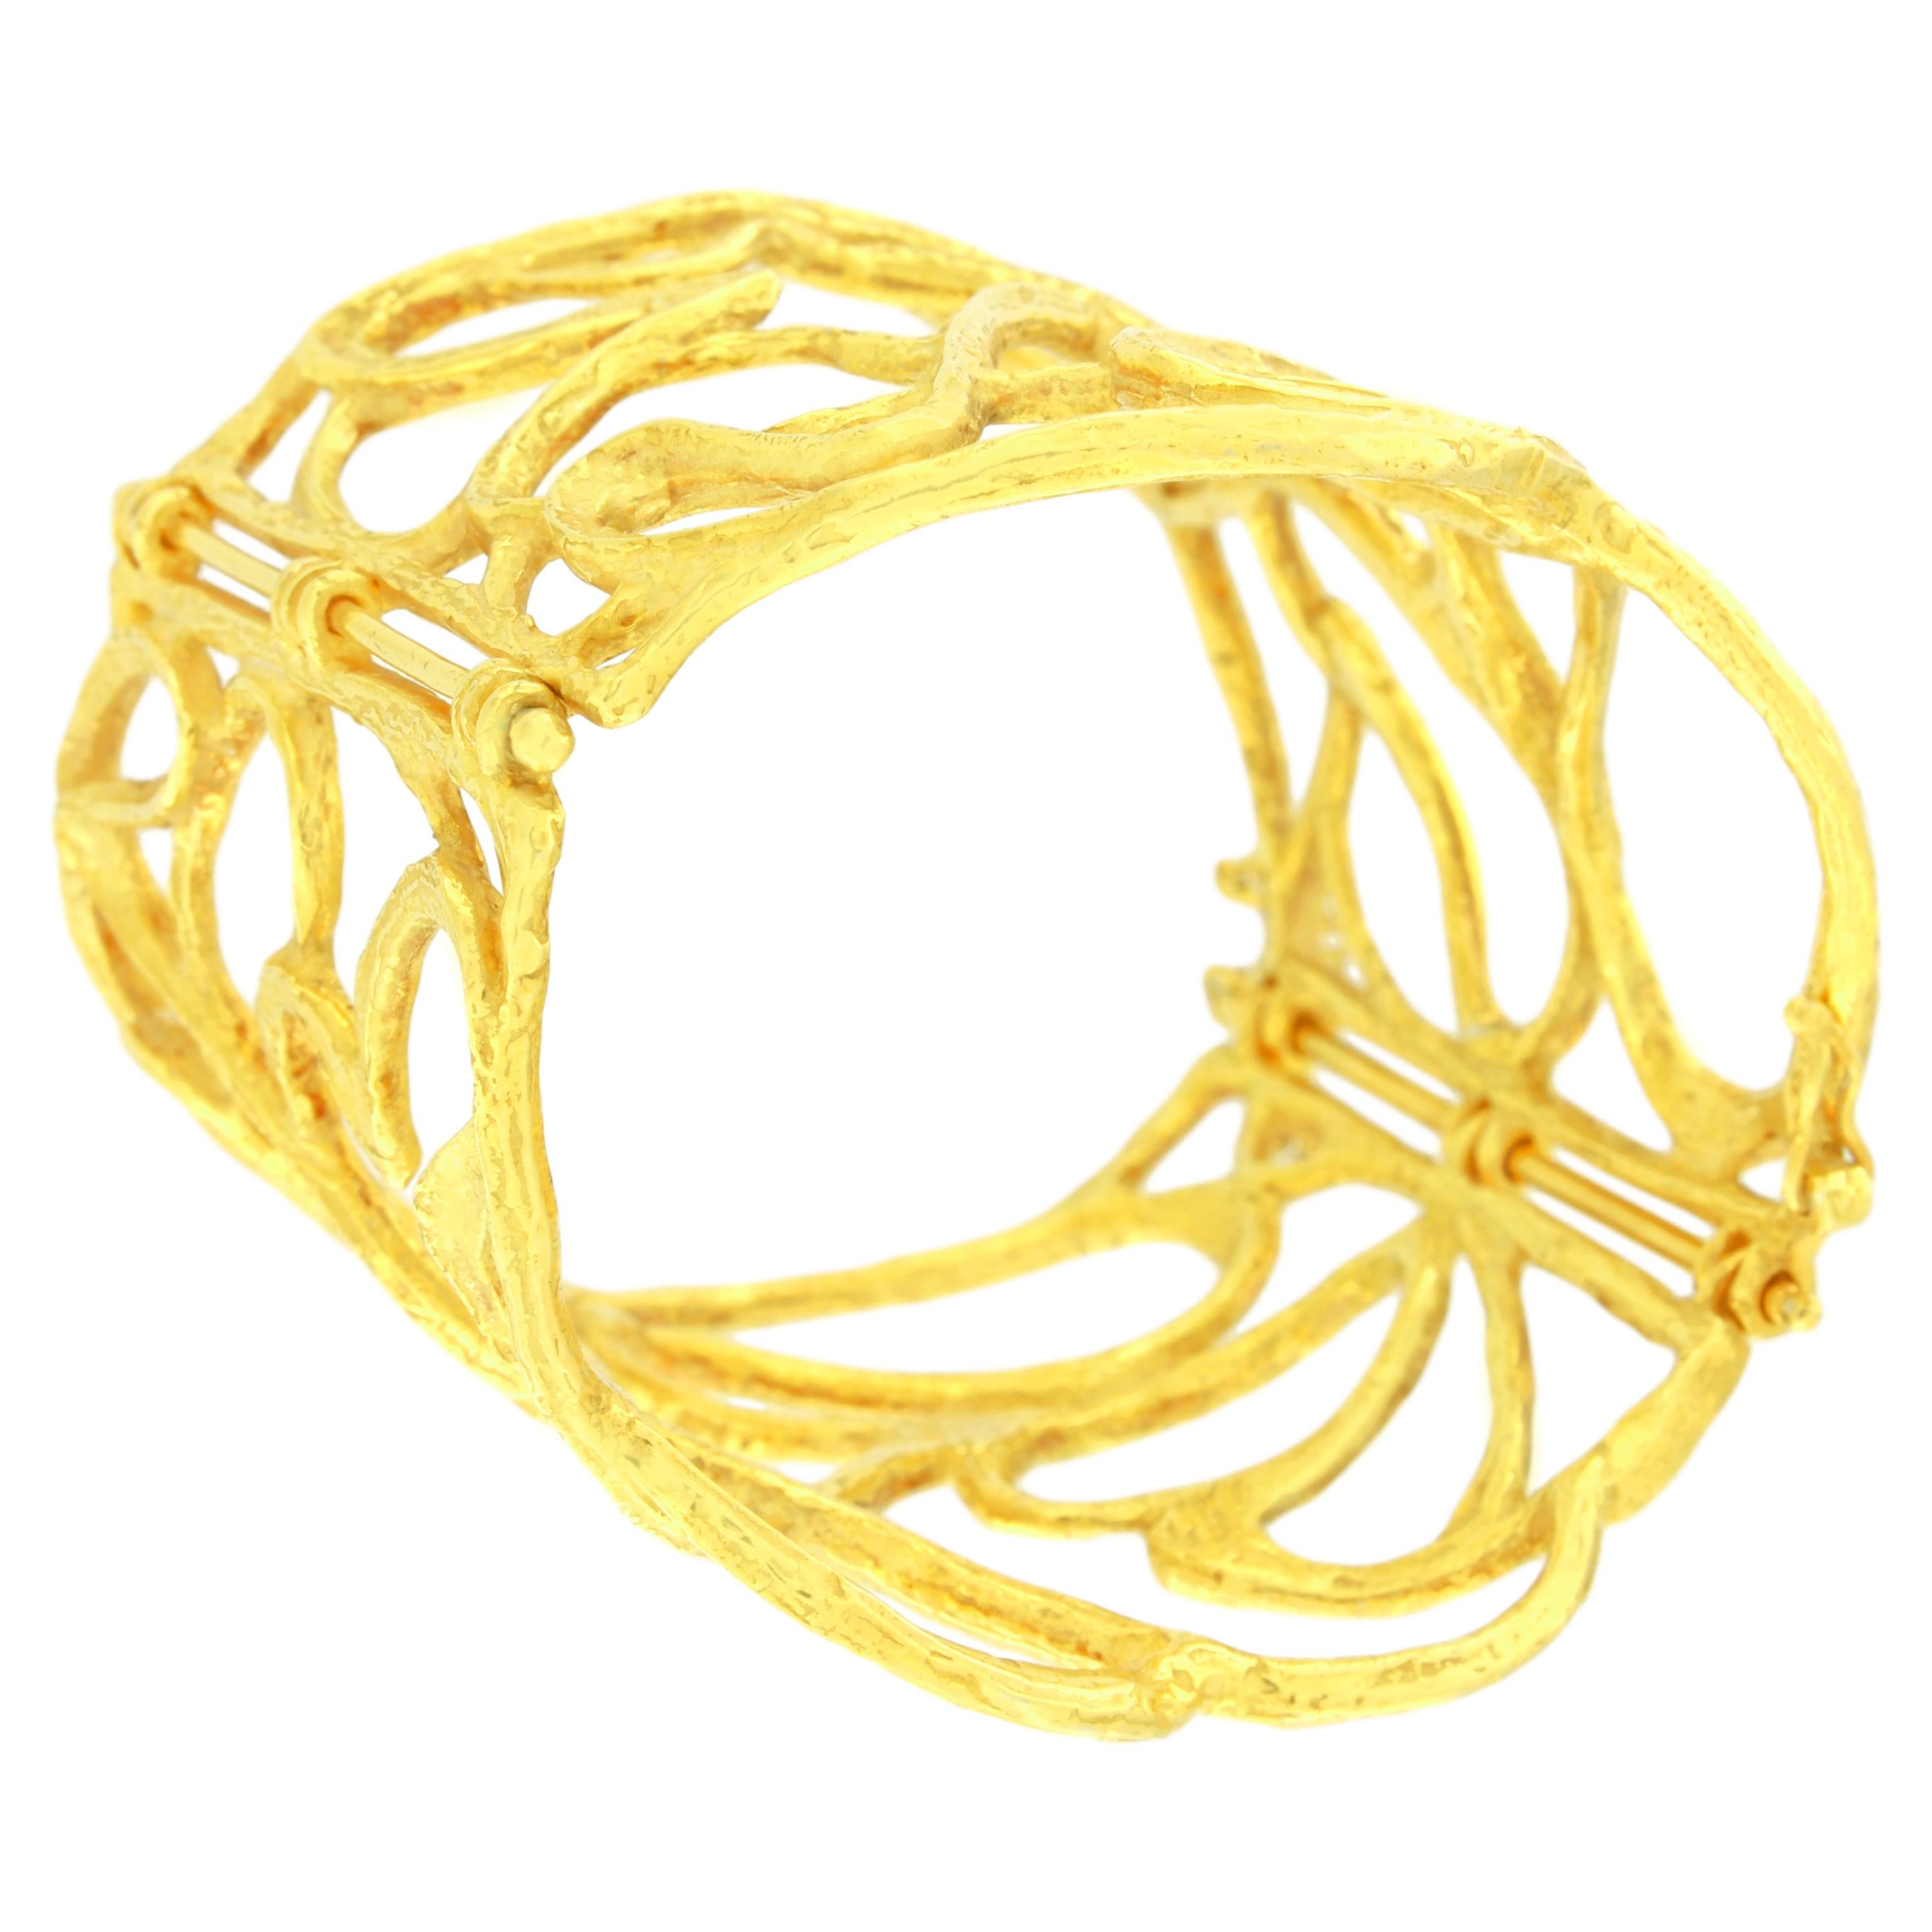 Gorgeous Art Deco Style Wire Cuff Bracelet made in 18 Karat Satin Yellow Gold , hand-crafted with lost-wax casting technique.

Lost-wax casting, one of the oldest techniques for creating jewelry, forms the basis of Sacchi's jewelry production.